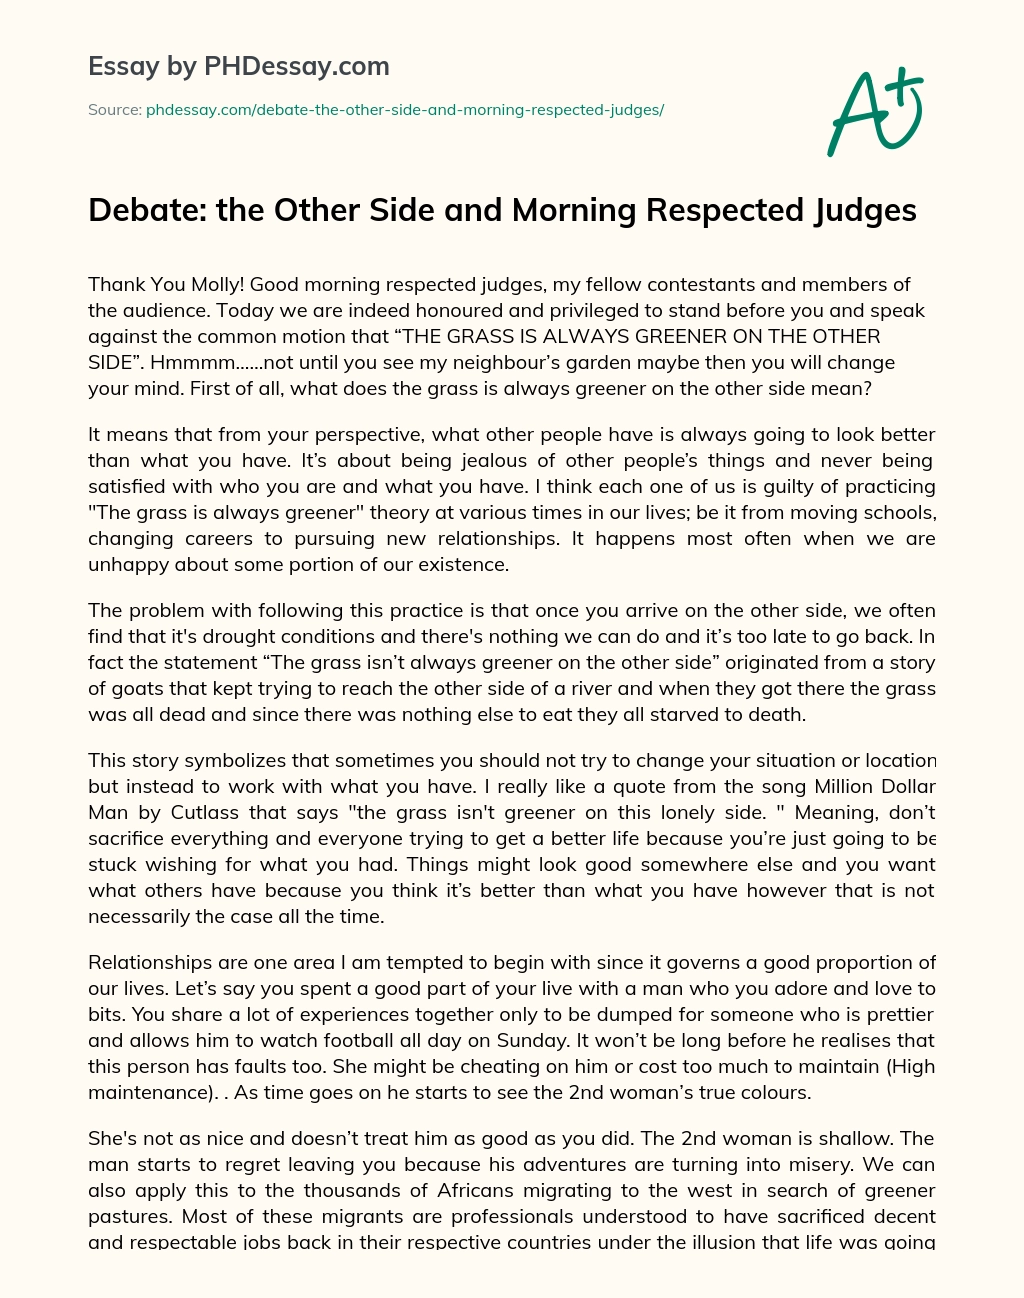 Debate: the Other Side and Morning Respected Judges essay